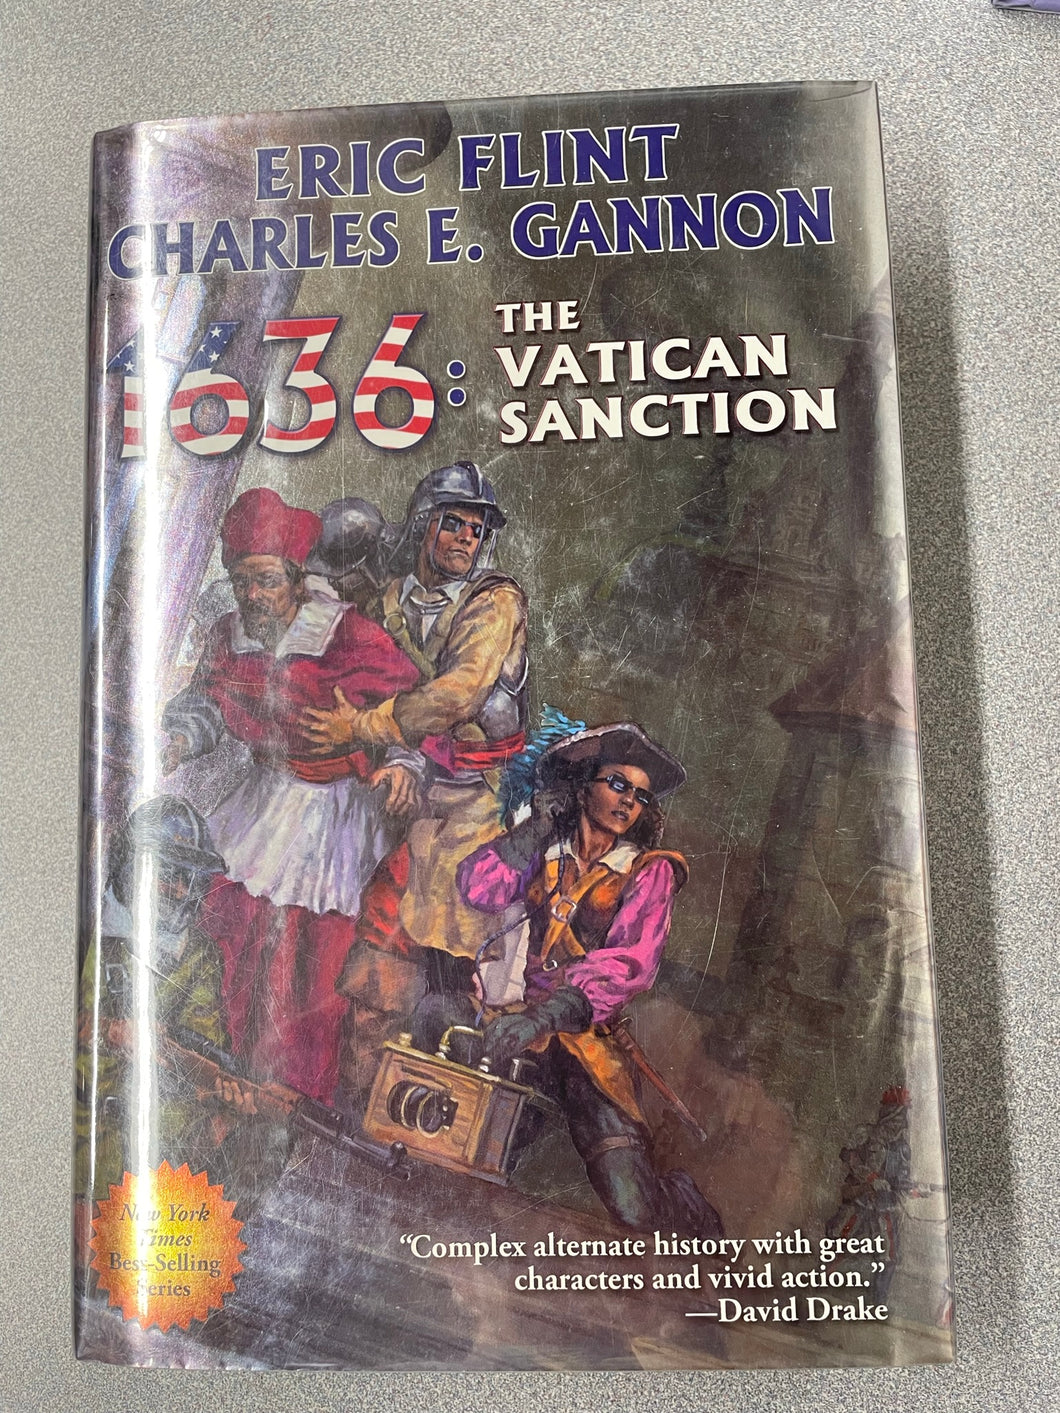 Flint, Eric and Charles E. Gannon, 1636: The Vatican Sanction [2017] SF 9/23